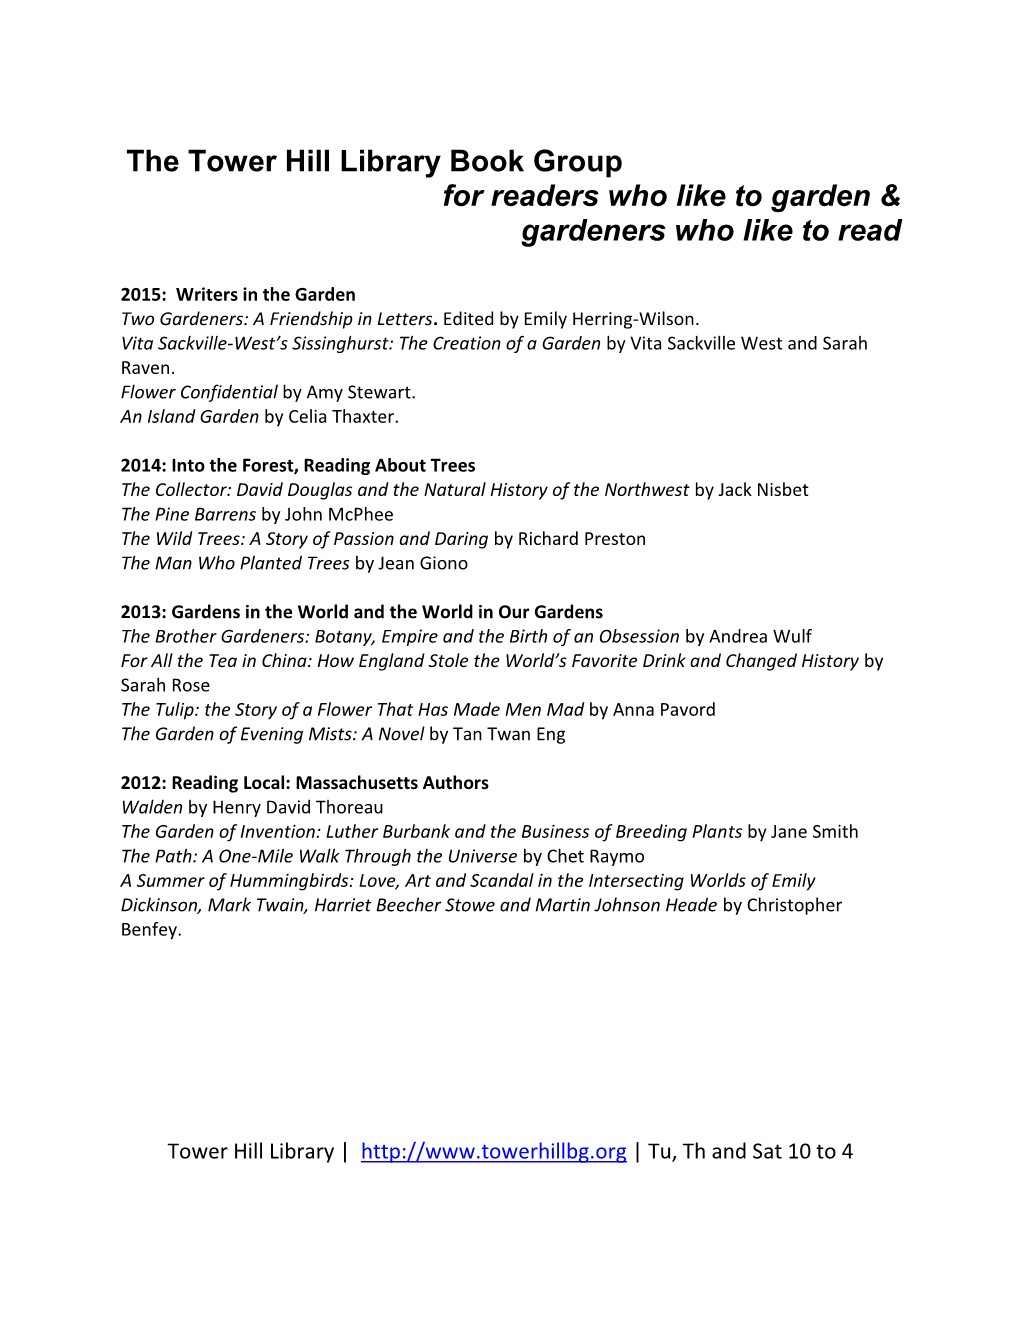 The Tower Hill Library Book Group for Readers Who Like to Garden & Gardeners Who Like to Read